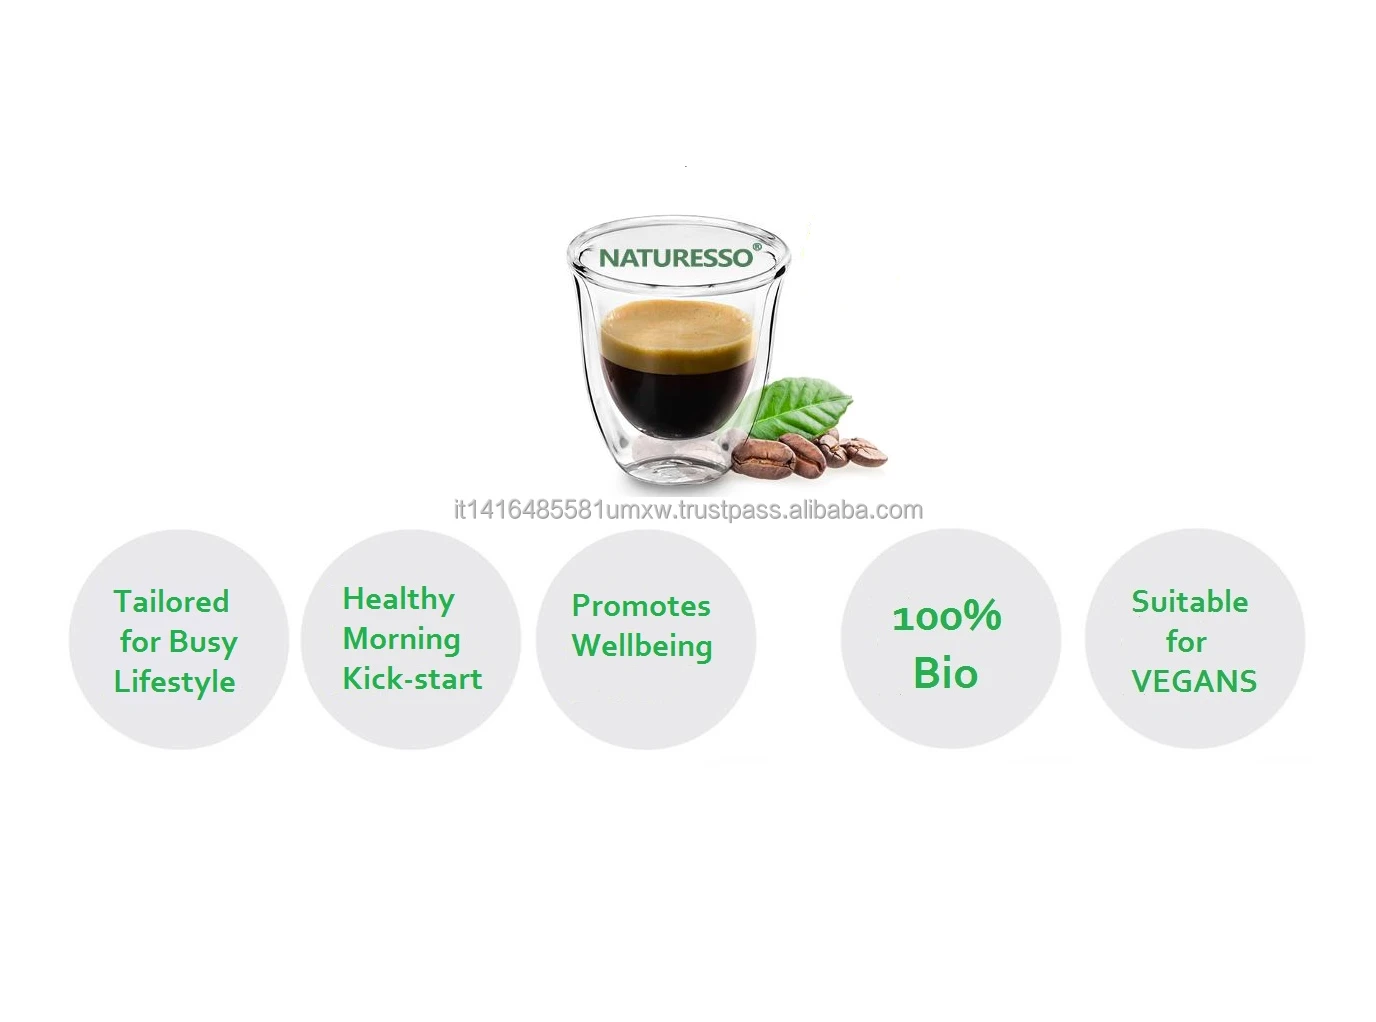 Naturesso 10 Herbs, ground organic coffee with 10 detoxifying herbs and spices, capsules compatible Nespresso in boxes of 100